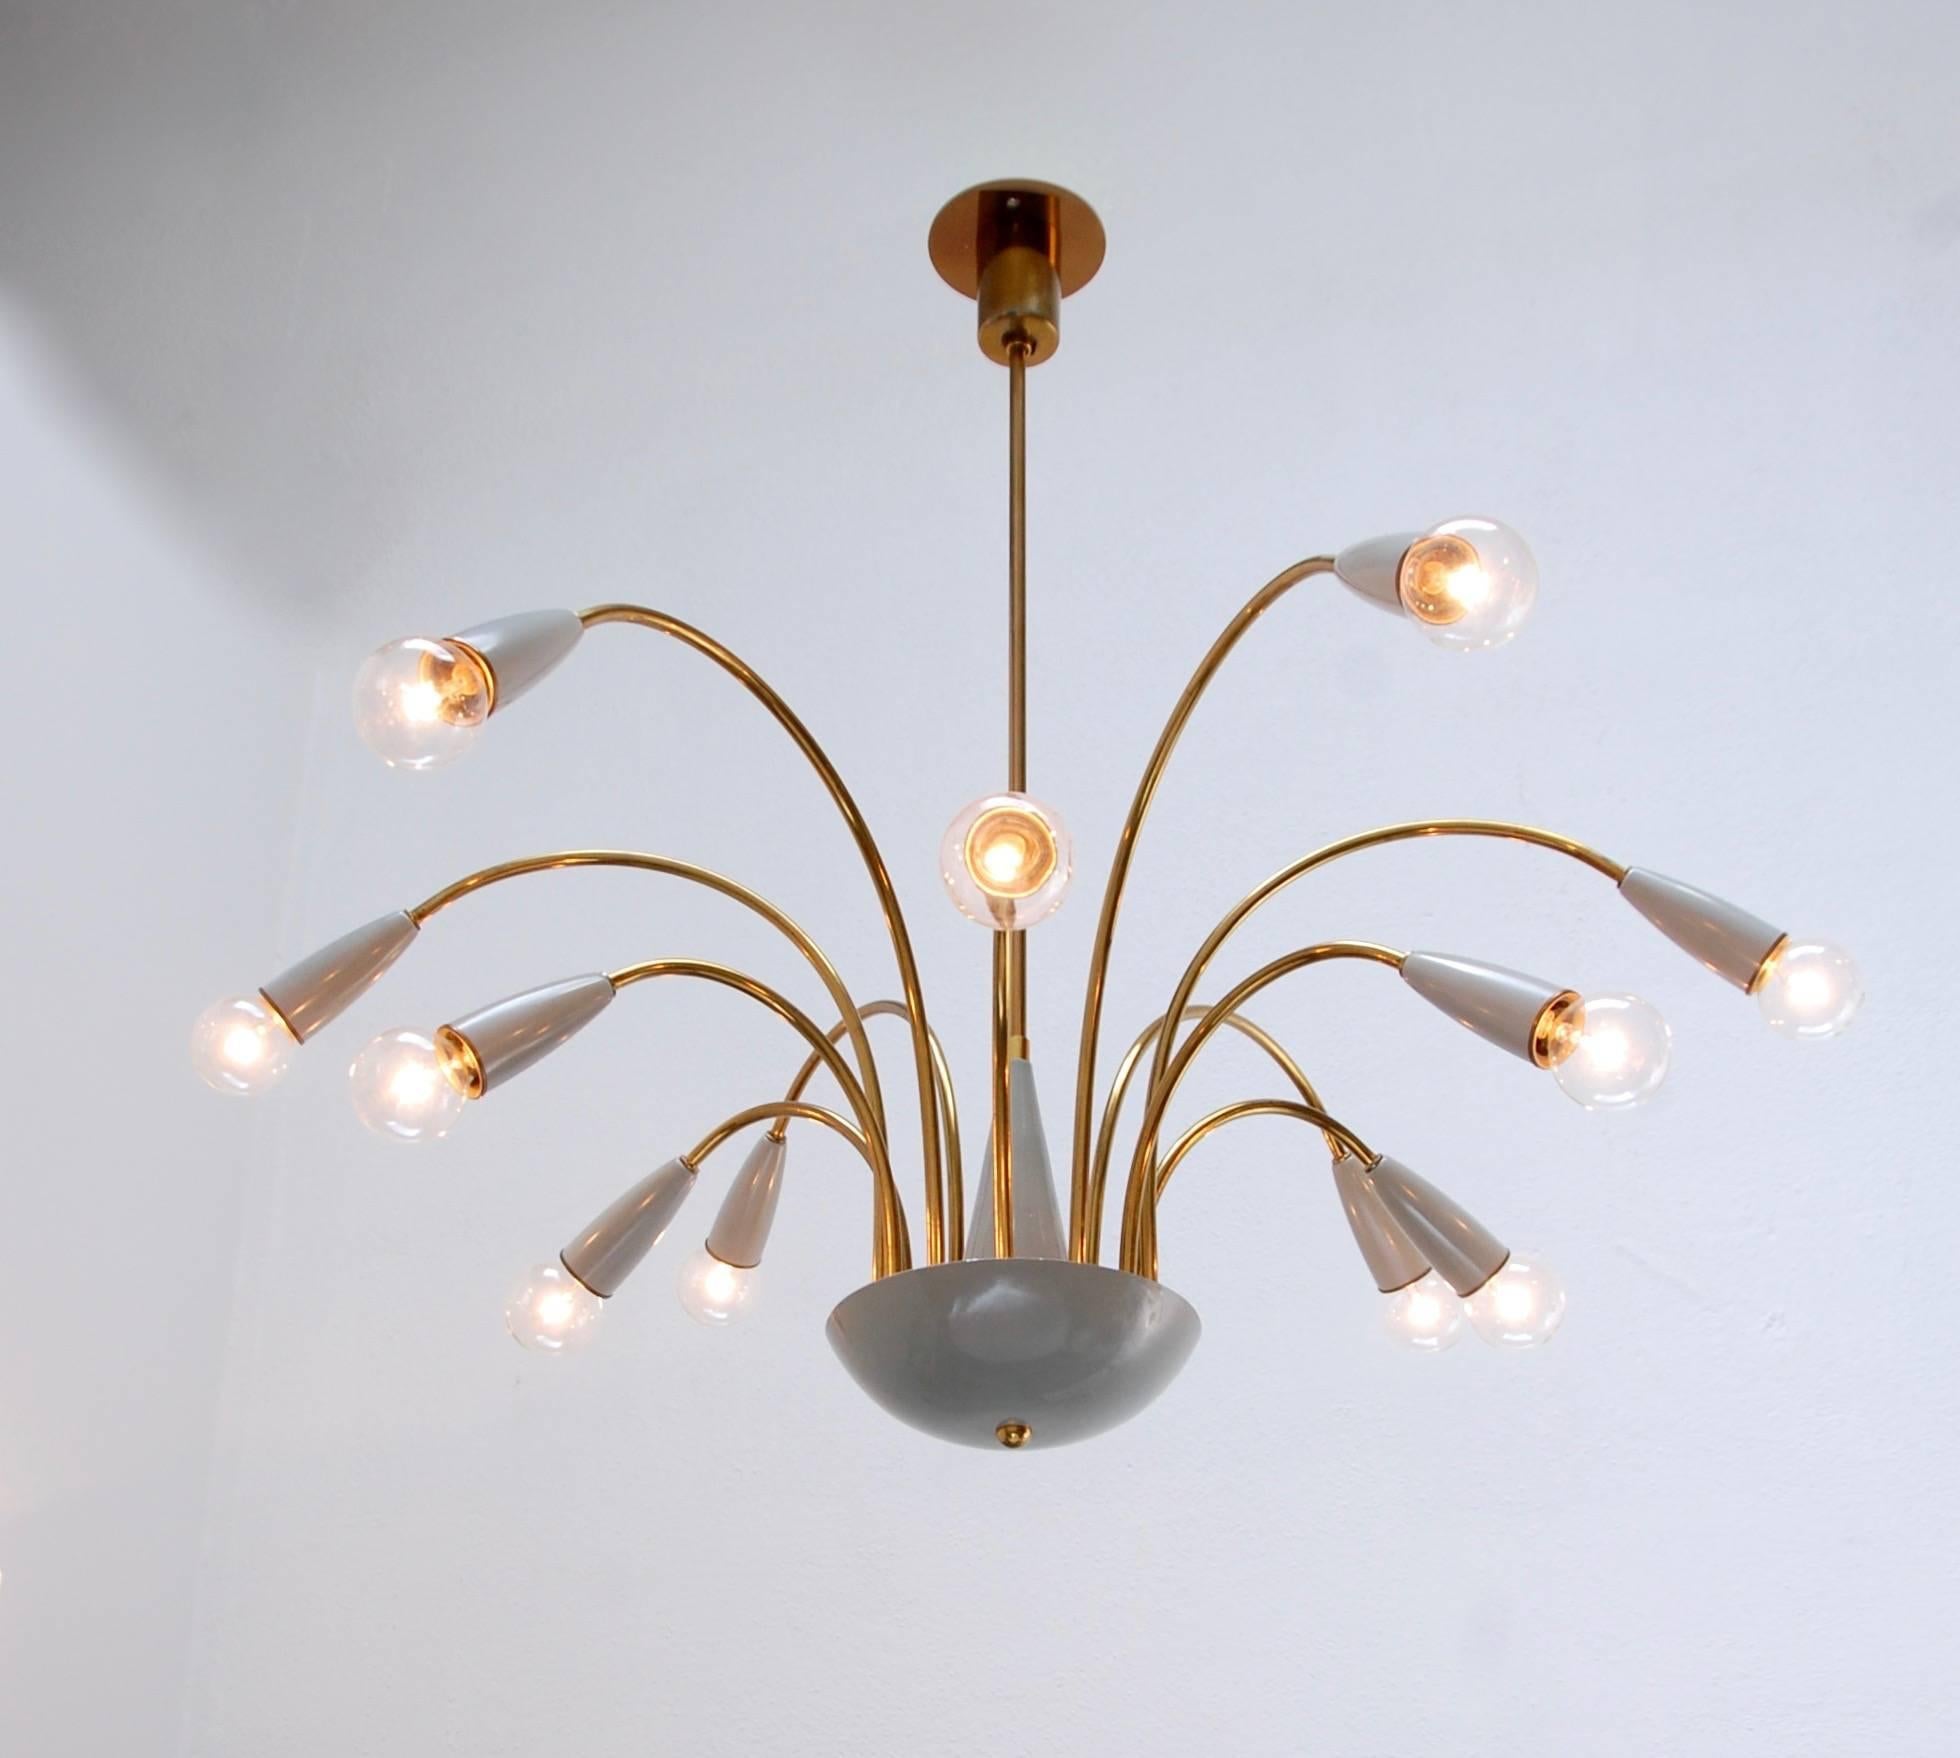 1960s botanical chandelier from Italy. Fixture has original paint and finish. The canopy has been modified for American j-box connection. E12 candelabra based light bulbs. Rewired for use in the US.
Drop: 28”.
Fixture height: 12”.
Diameter: 31”